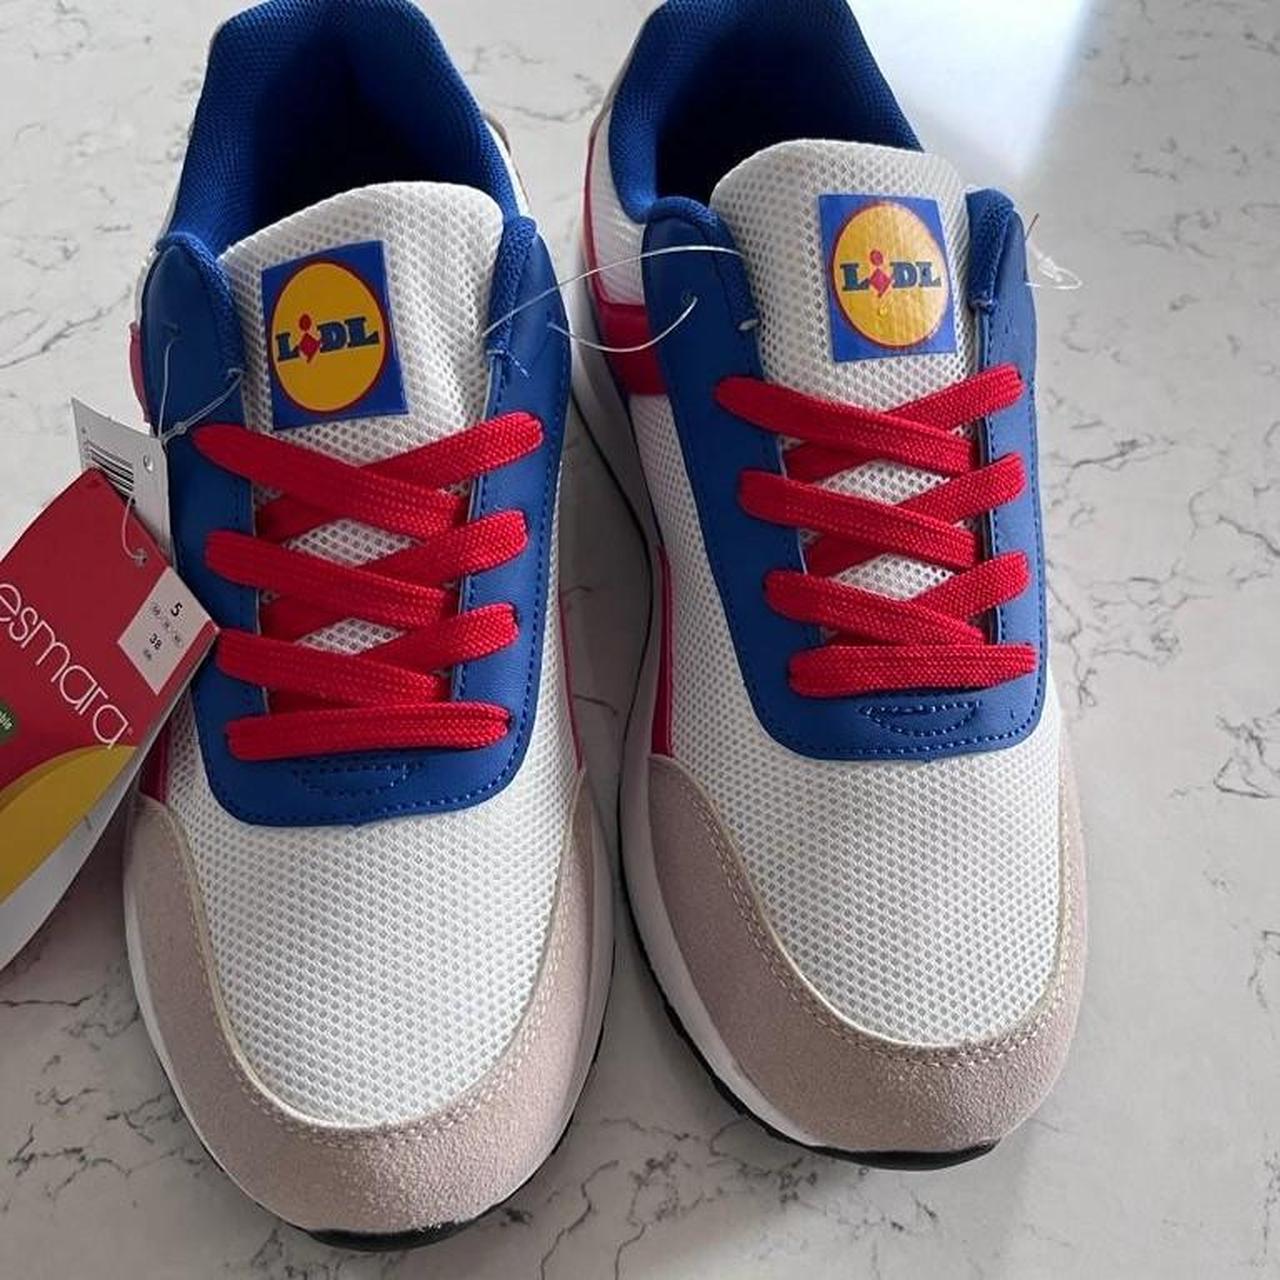 Lidl Trainers/Shoes. BRAND NEW. UK 9, 10, 11 - Depop